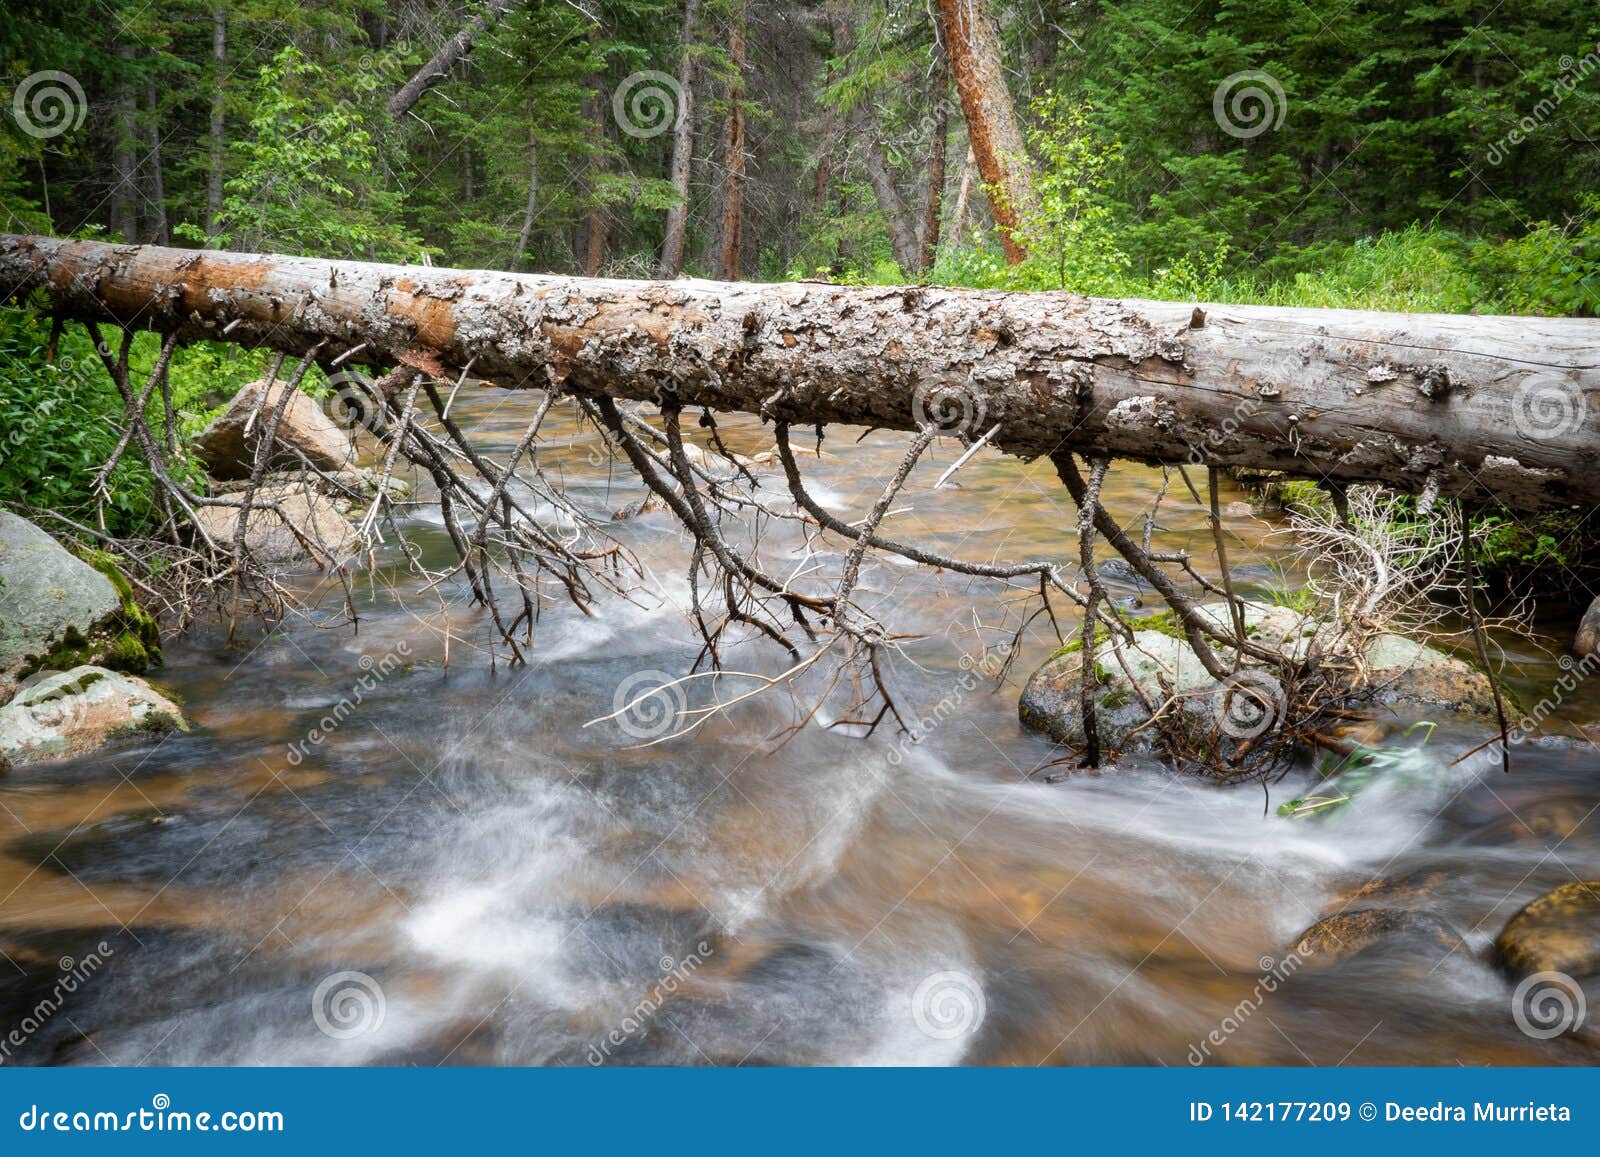 River Flowing Under Fallen Log With Trees Stock Image Image Of